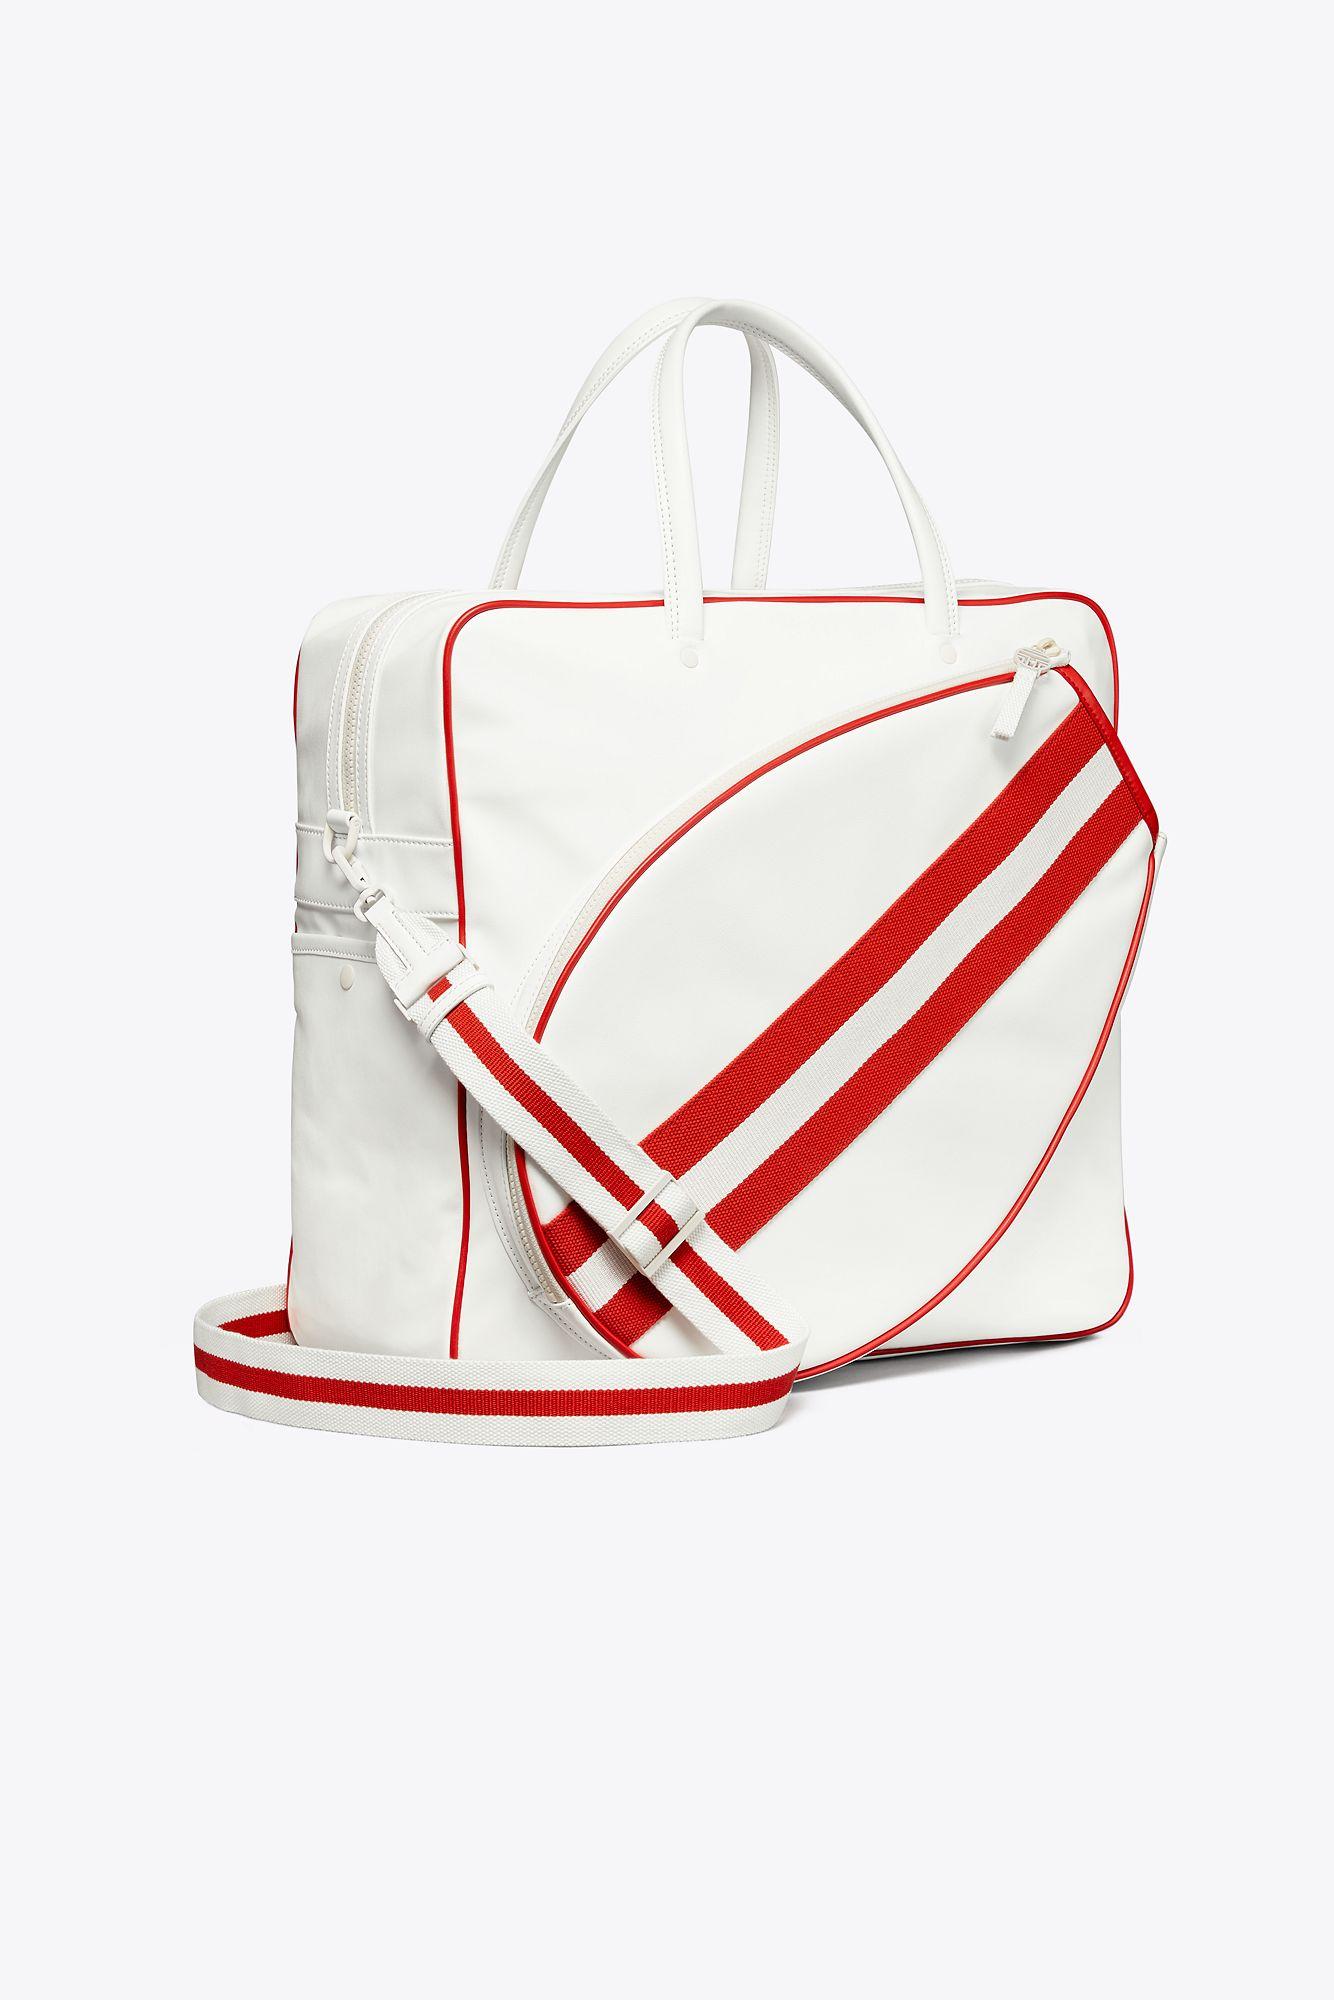 Tory Sport Retro Striped Weekender Duffel Bag  These 17 Stylish Travel Bags  Prove You Dont Have to Sacrifice Fashion For Function  POPSUGAR Fashion  Photo 2